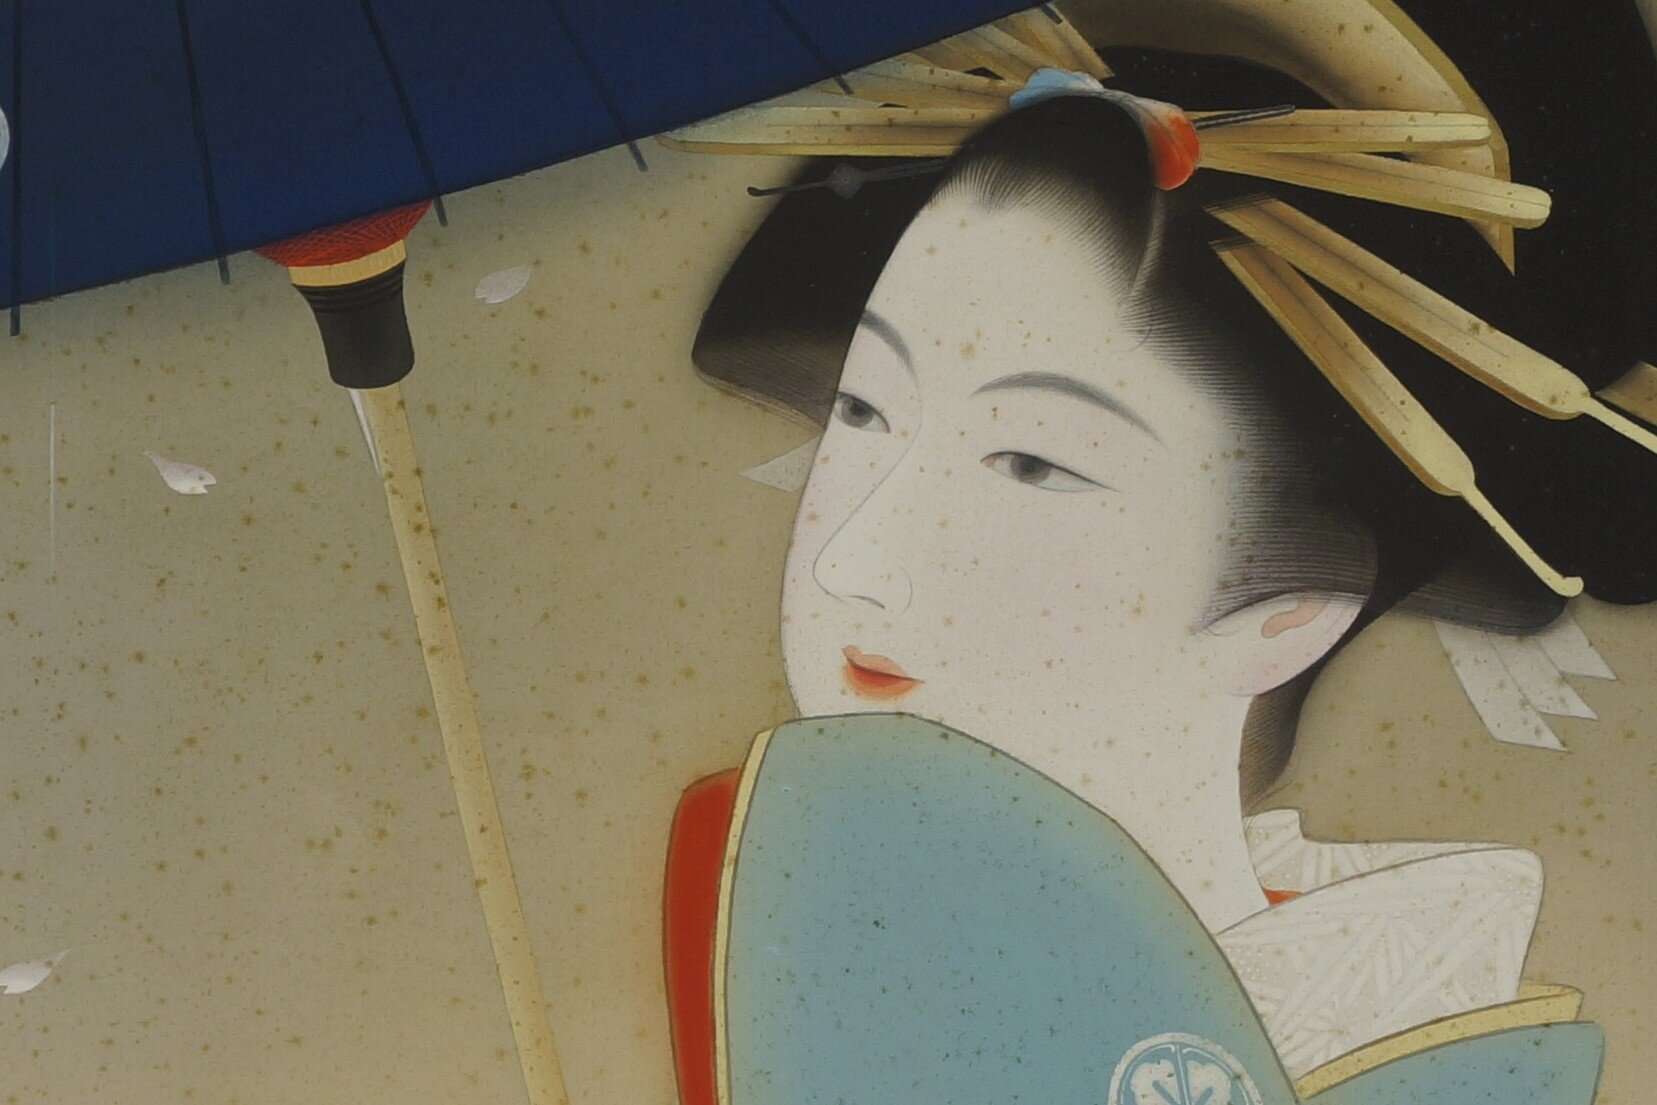 Cleaning of Nihon-ga (Japanese-style painting) with enzyme

